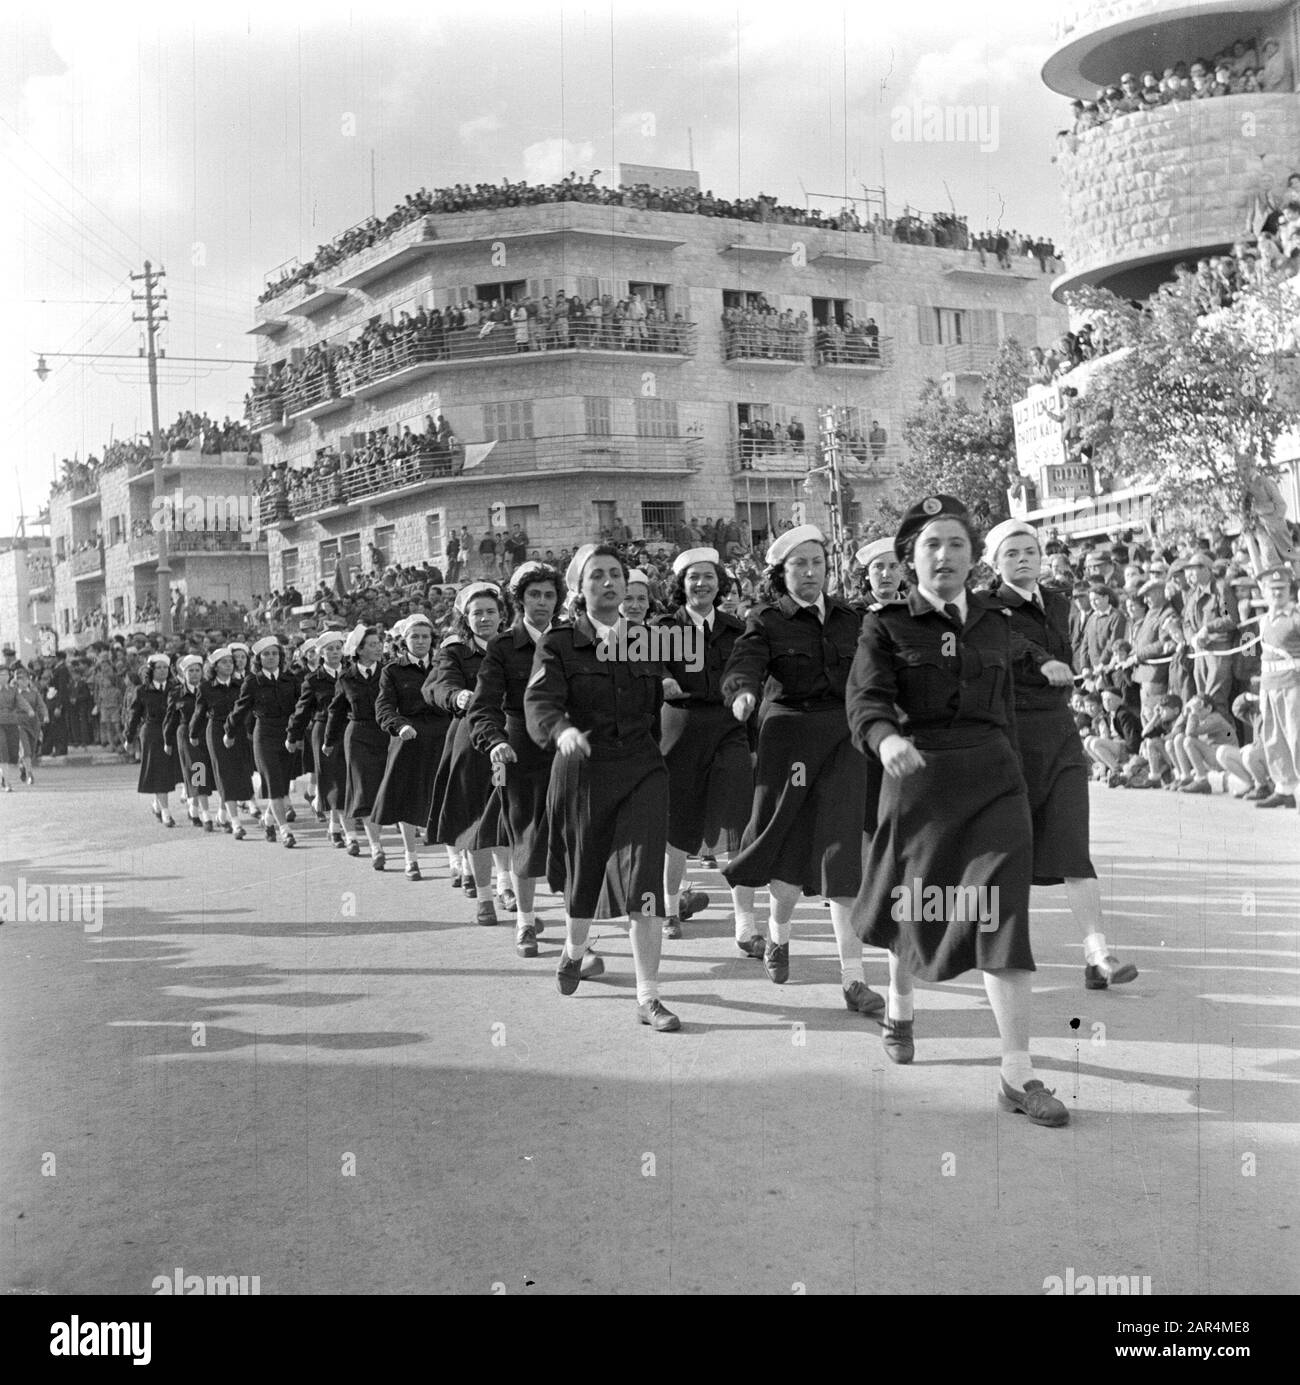 Israel 1948-1949: Haifa. Female naval personnel unit during the military parade in Haifa on the occasion of the first anniversary of Israel's independence on 15 May 1949. Stock Photo